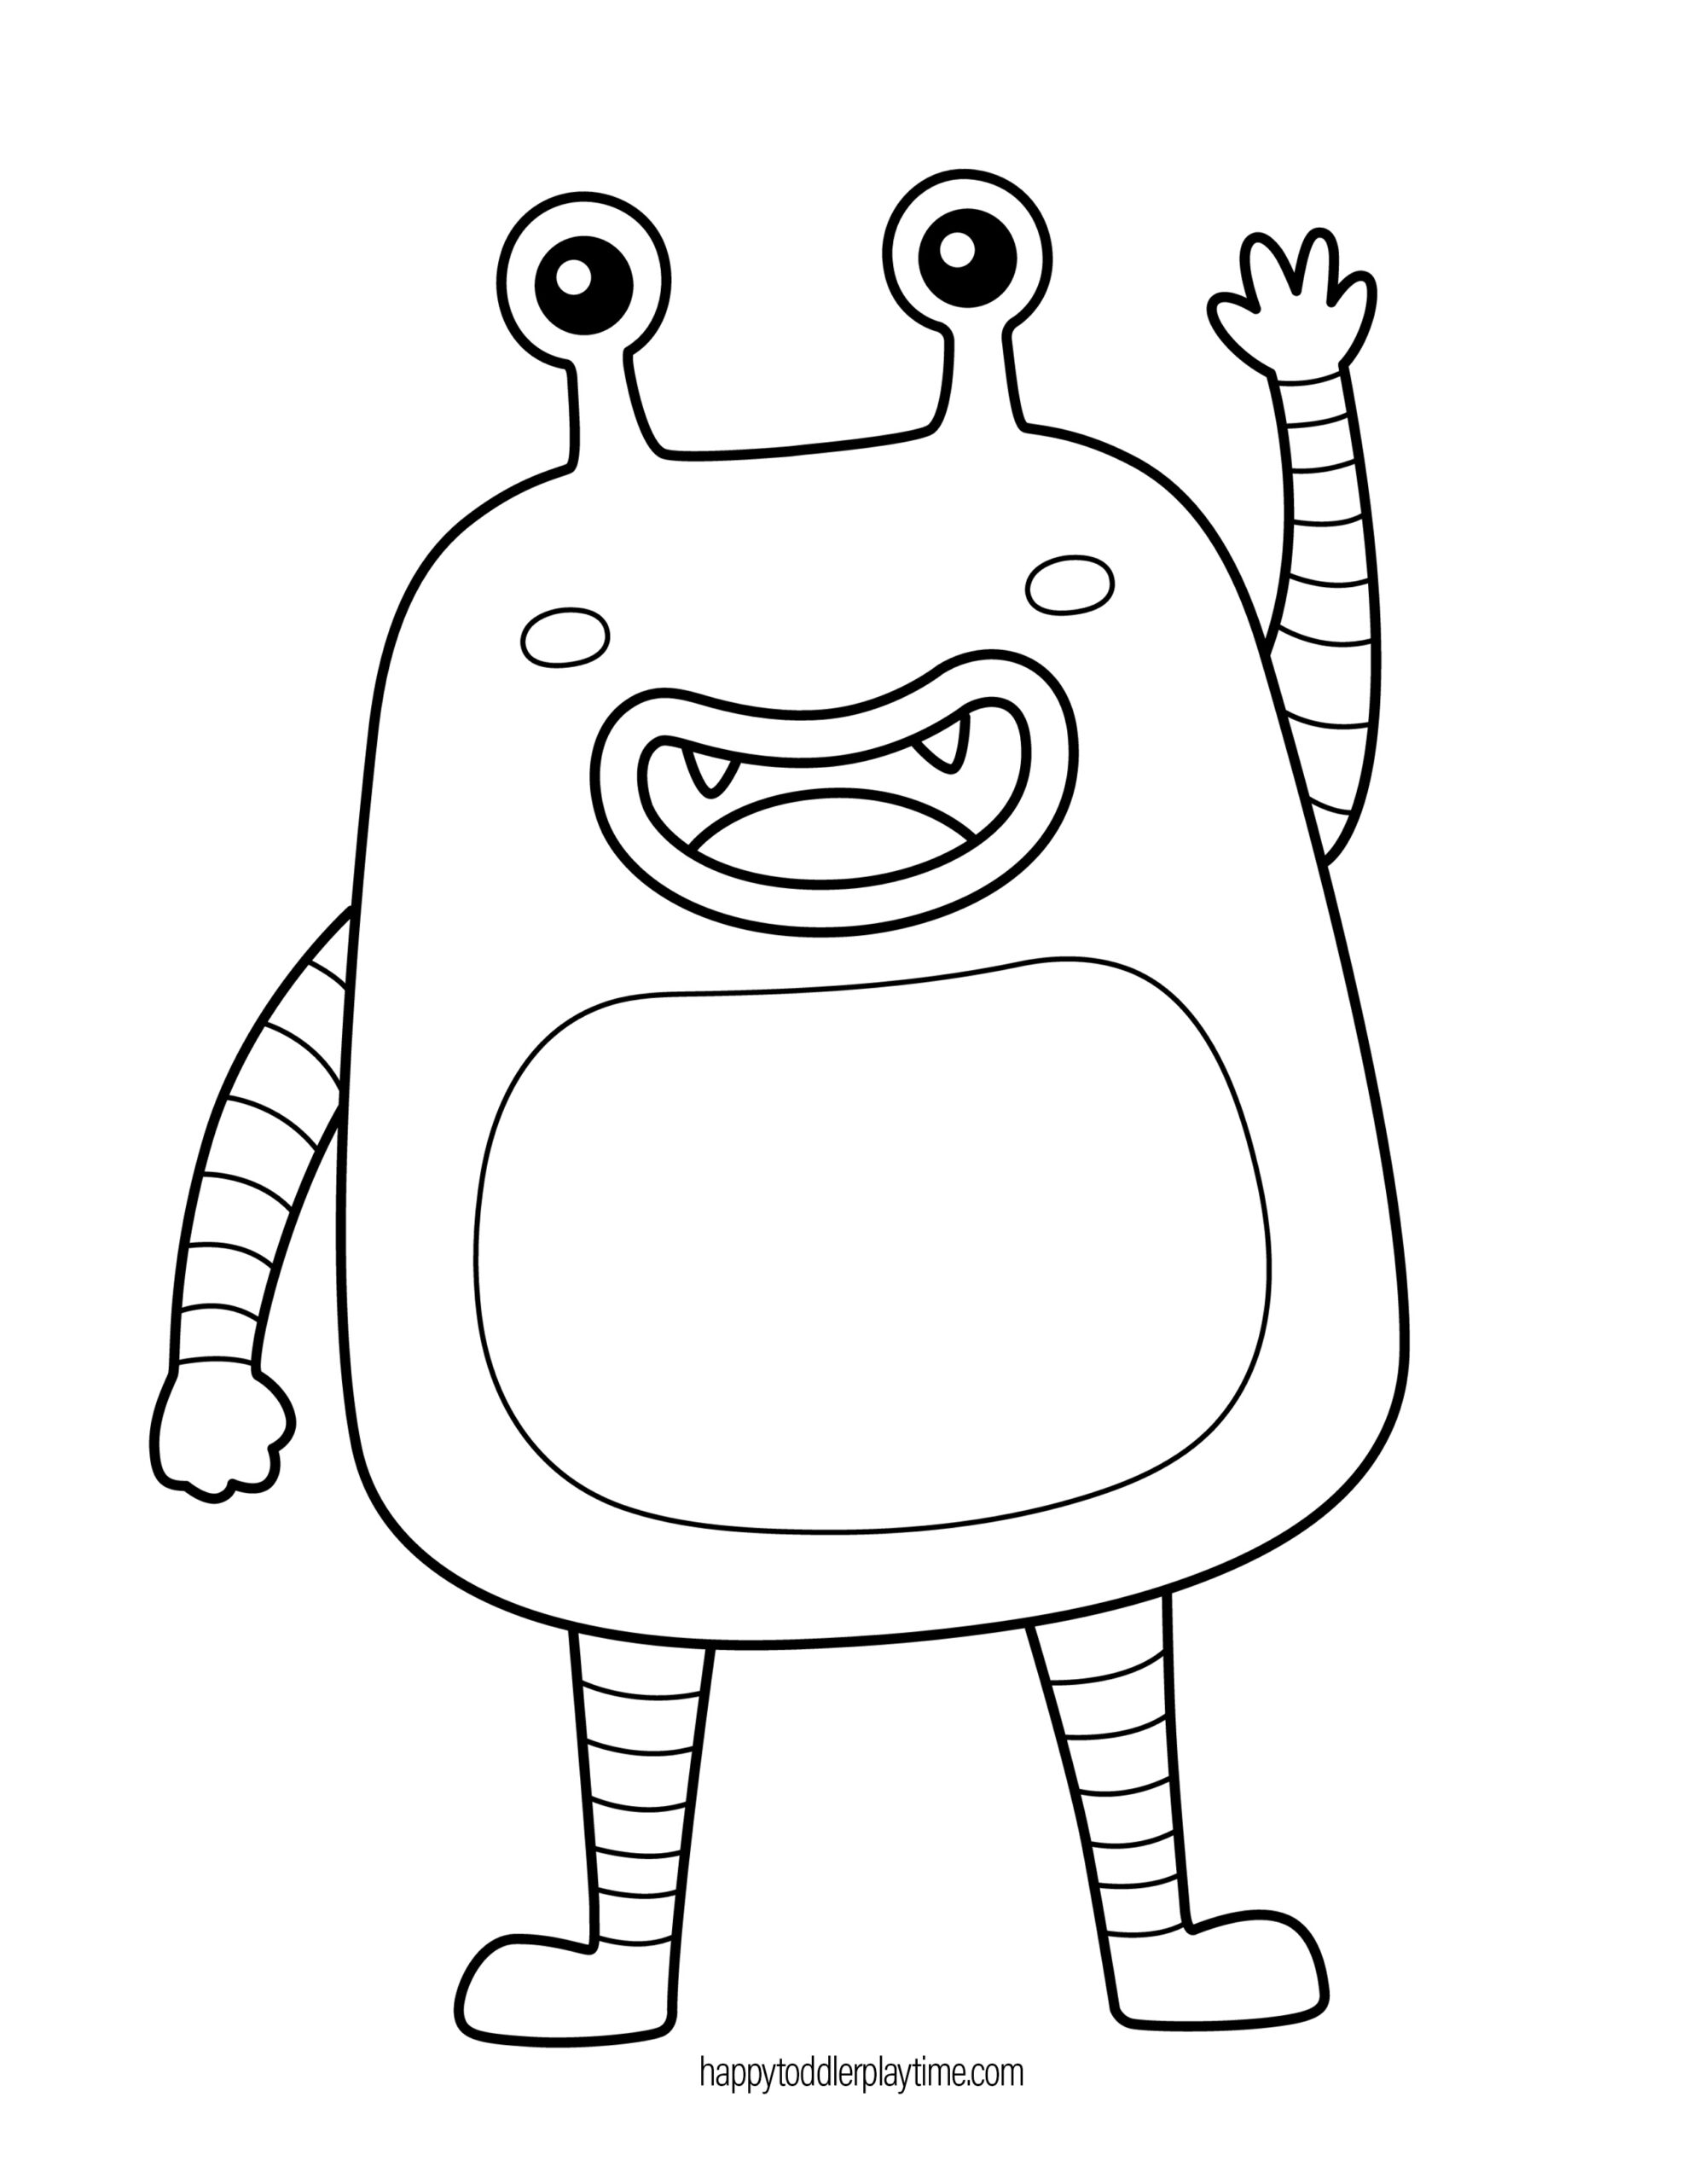 Printable monster templates for kids activities and crafts